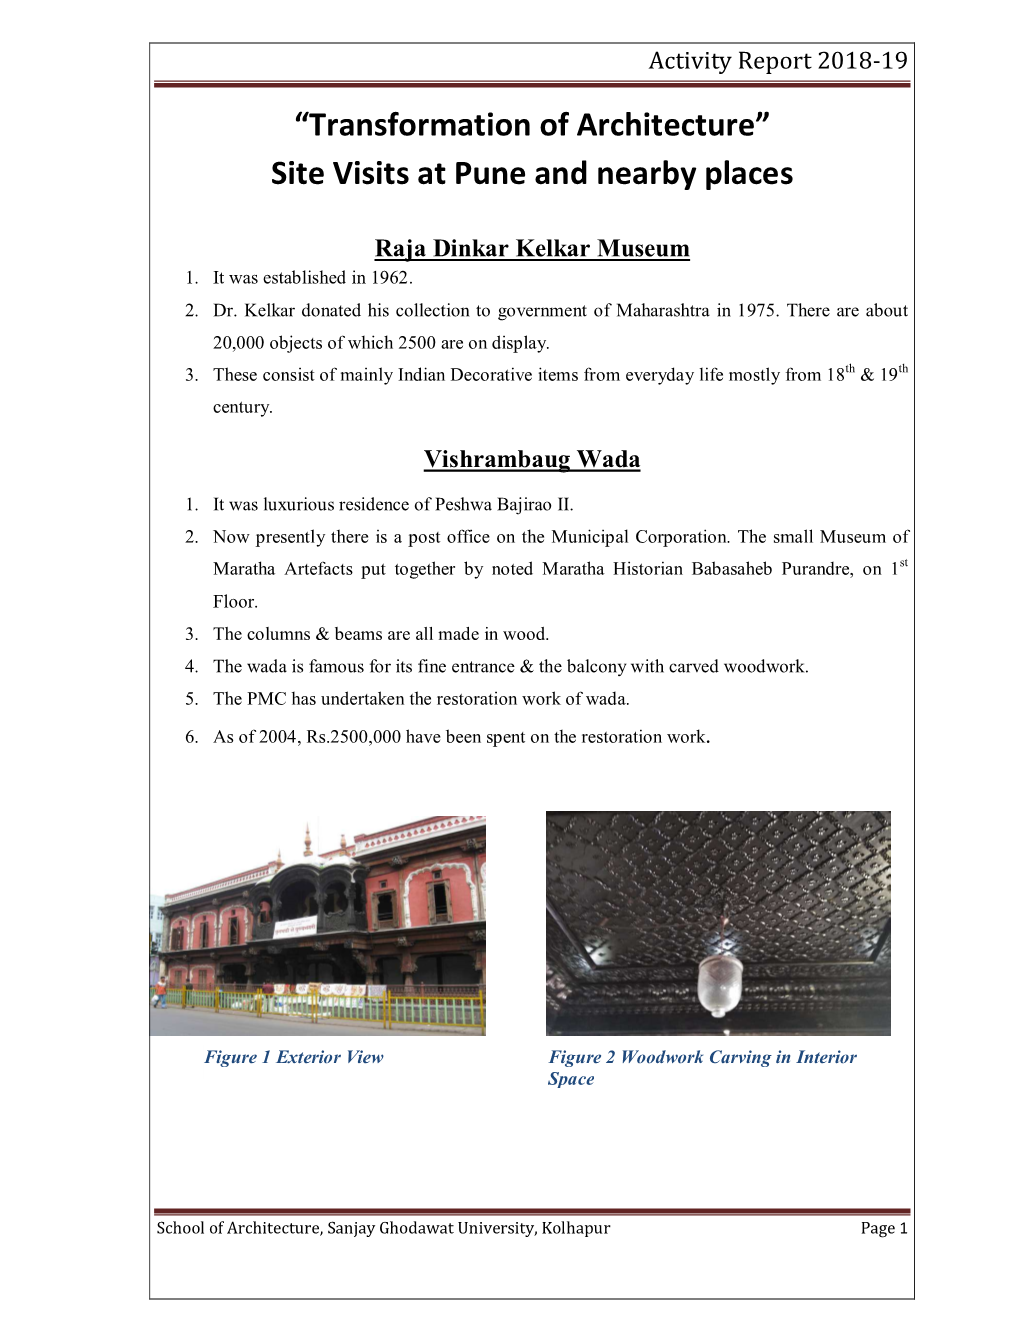 “Transformation of Architecture” Site Visits at Pune and Nearby Places